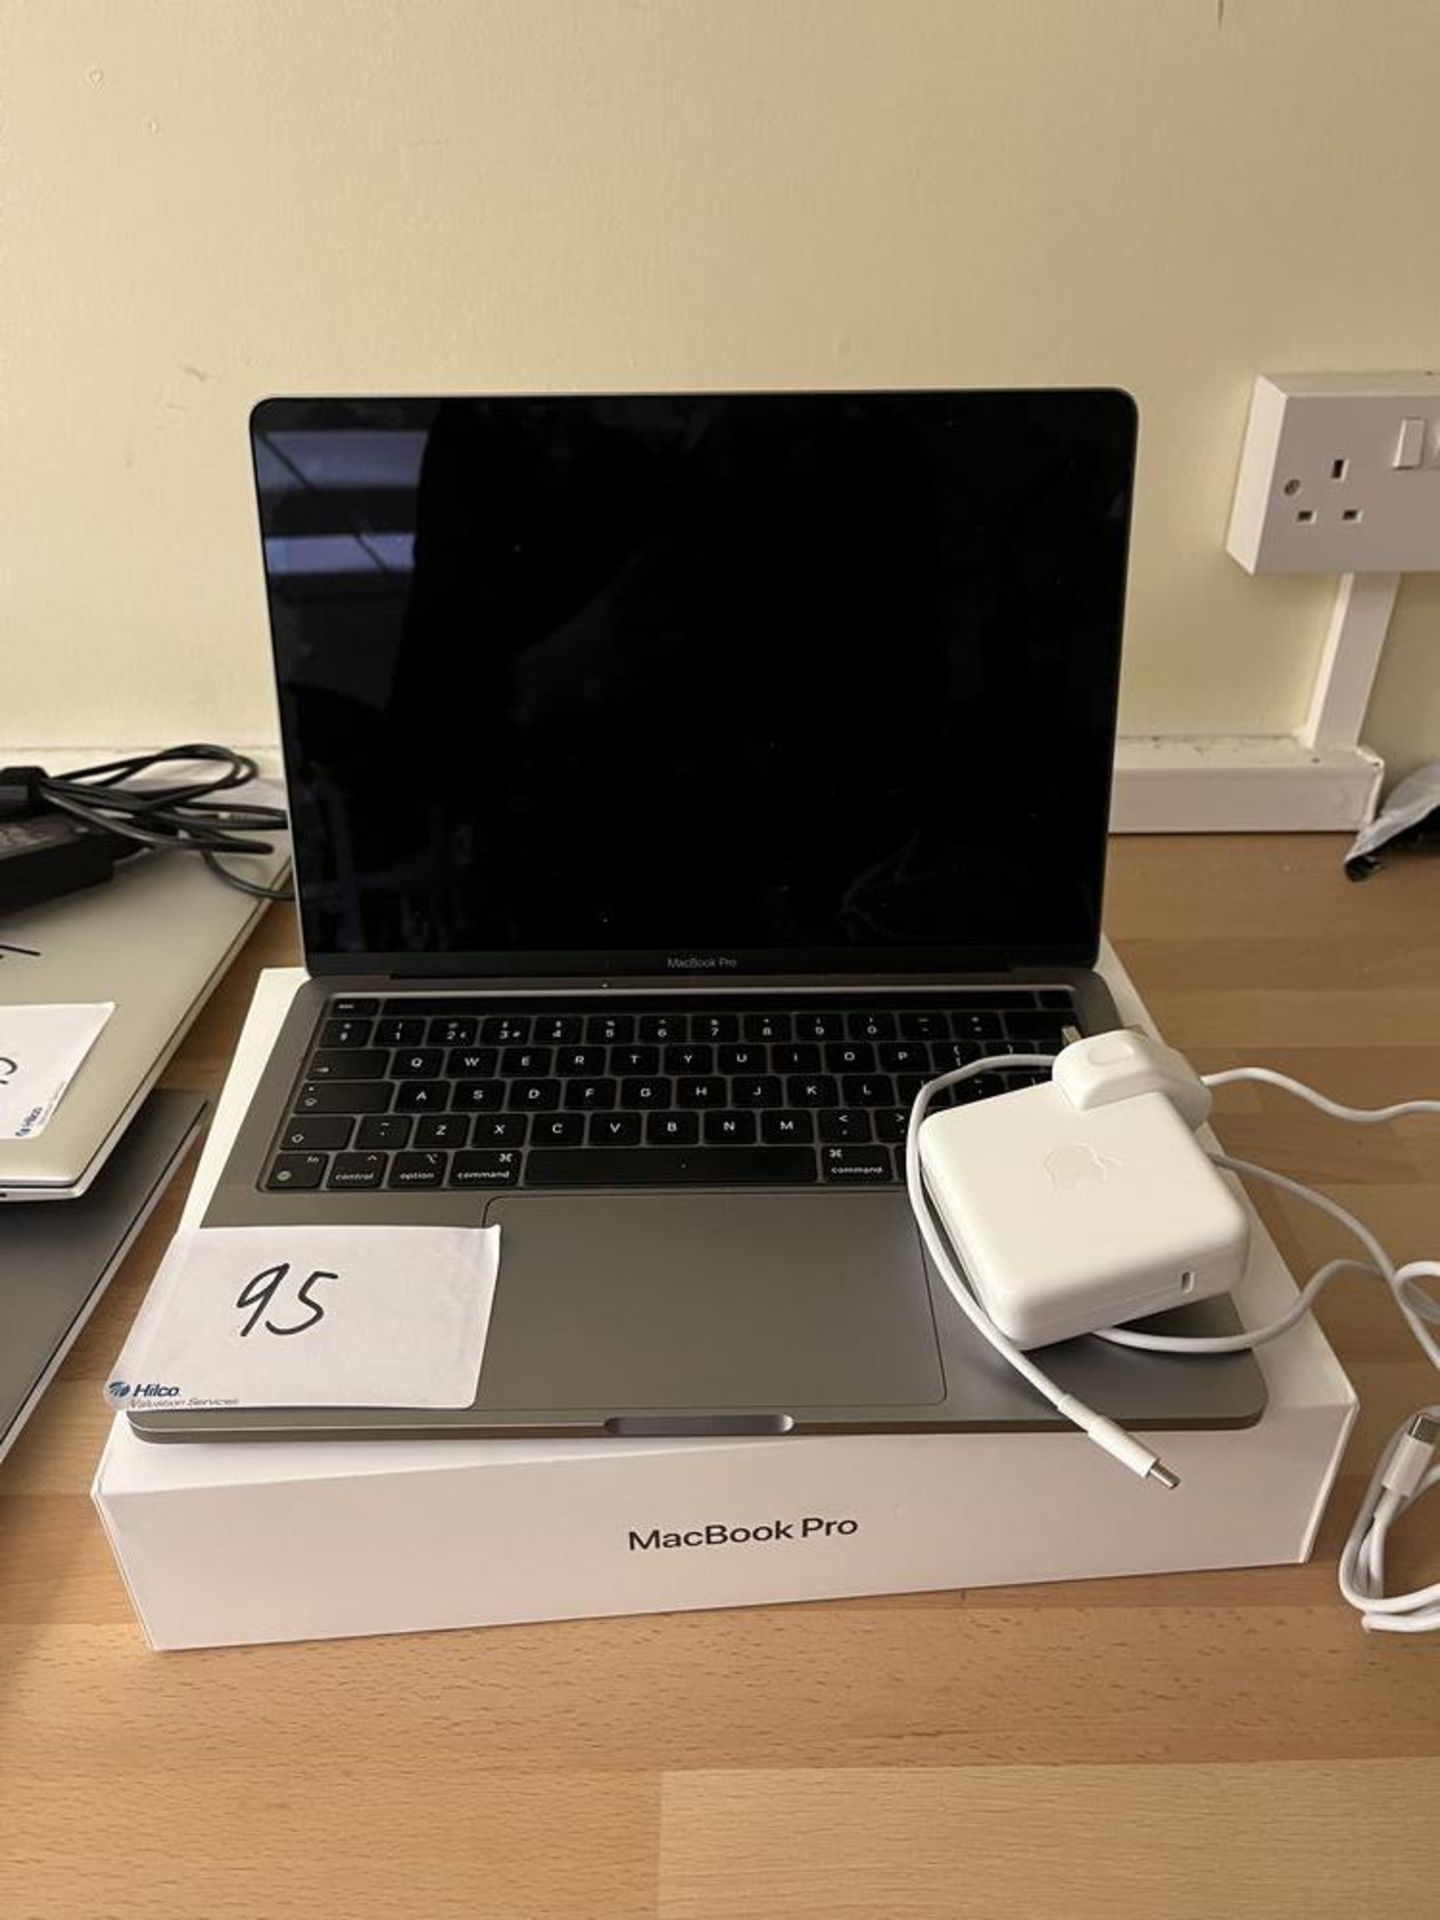 MacBook Pro (13-inch, M1, 2020) 8GB Memory With charger and box Serial Number FVFFD73NQ05D